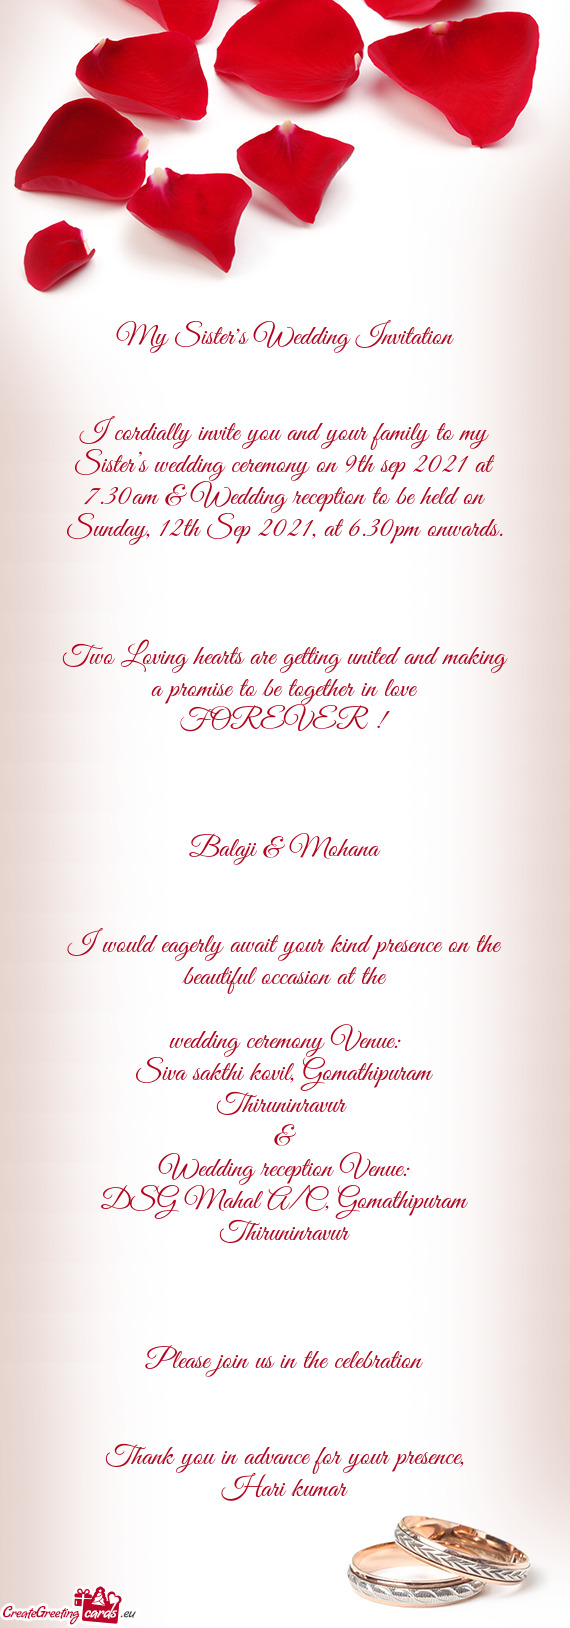 Wedding reception to be held on Sunday, 12th Sep 2021, at 6.30pm onwards